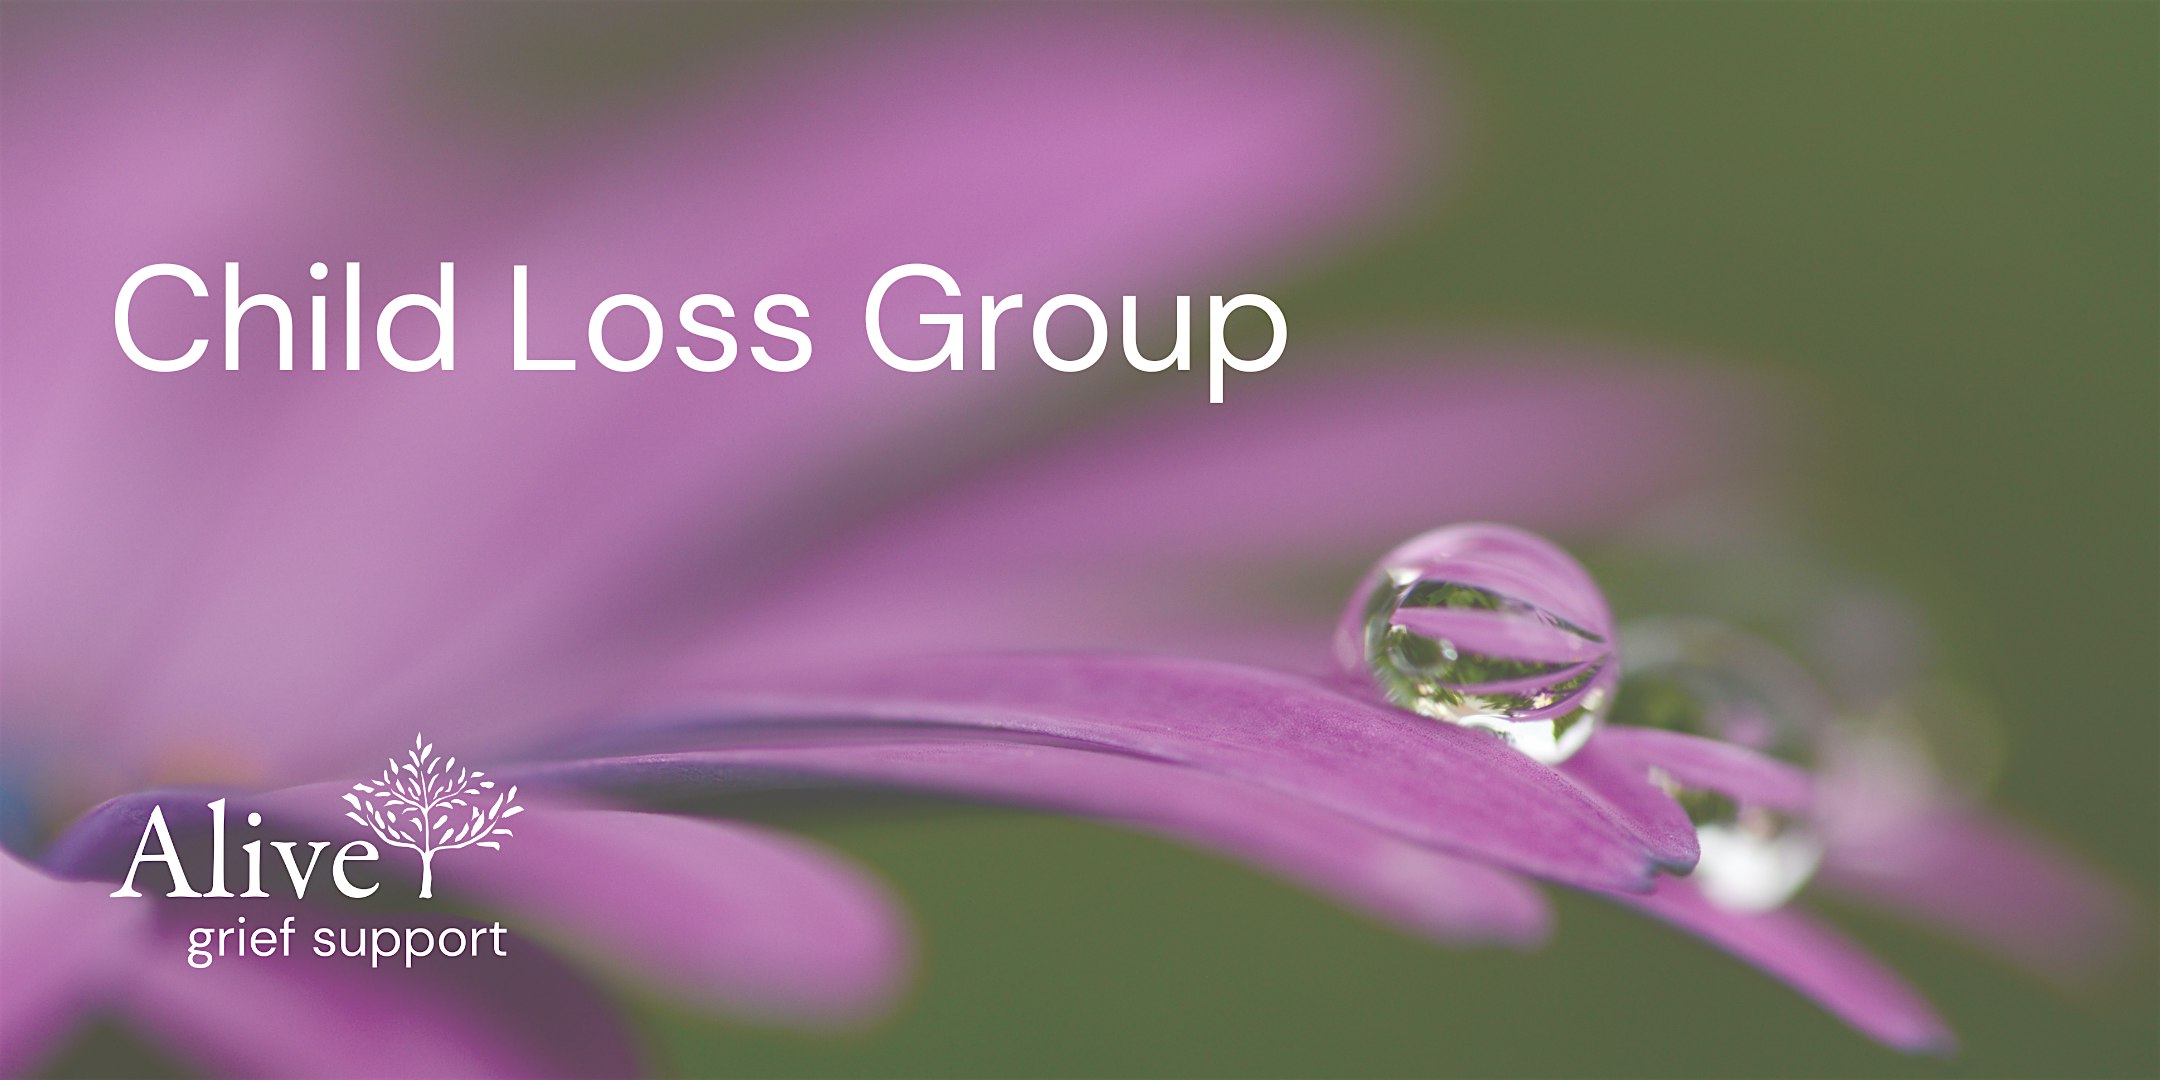 Child Loss Group